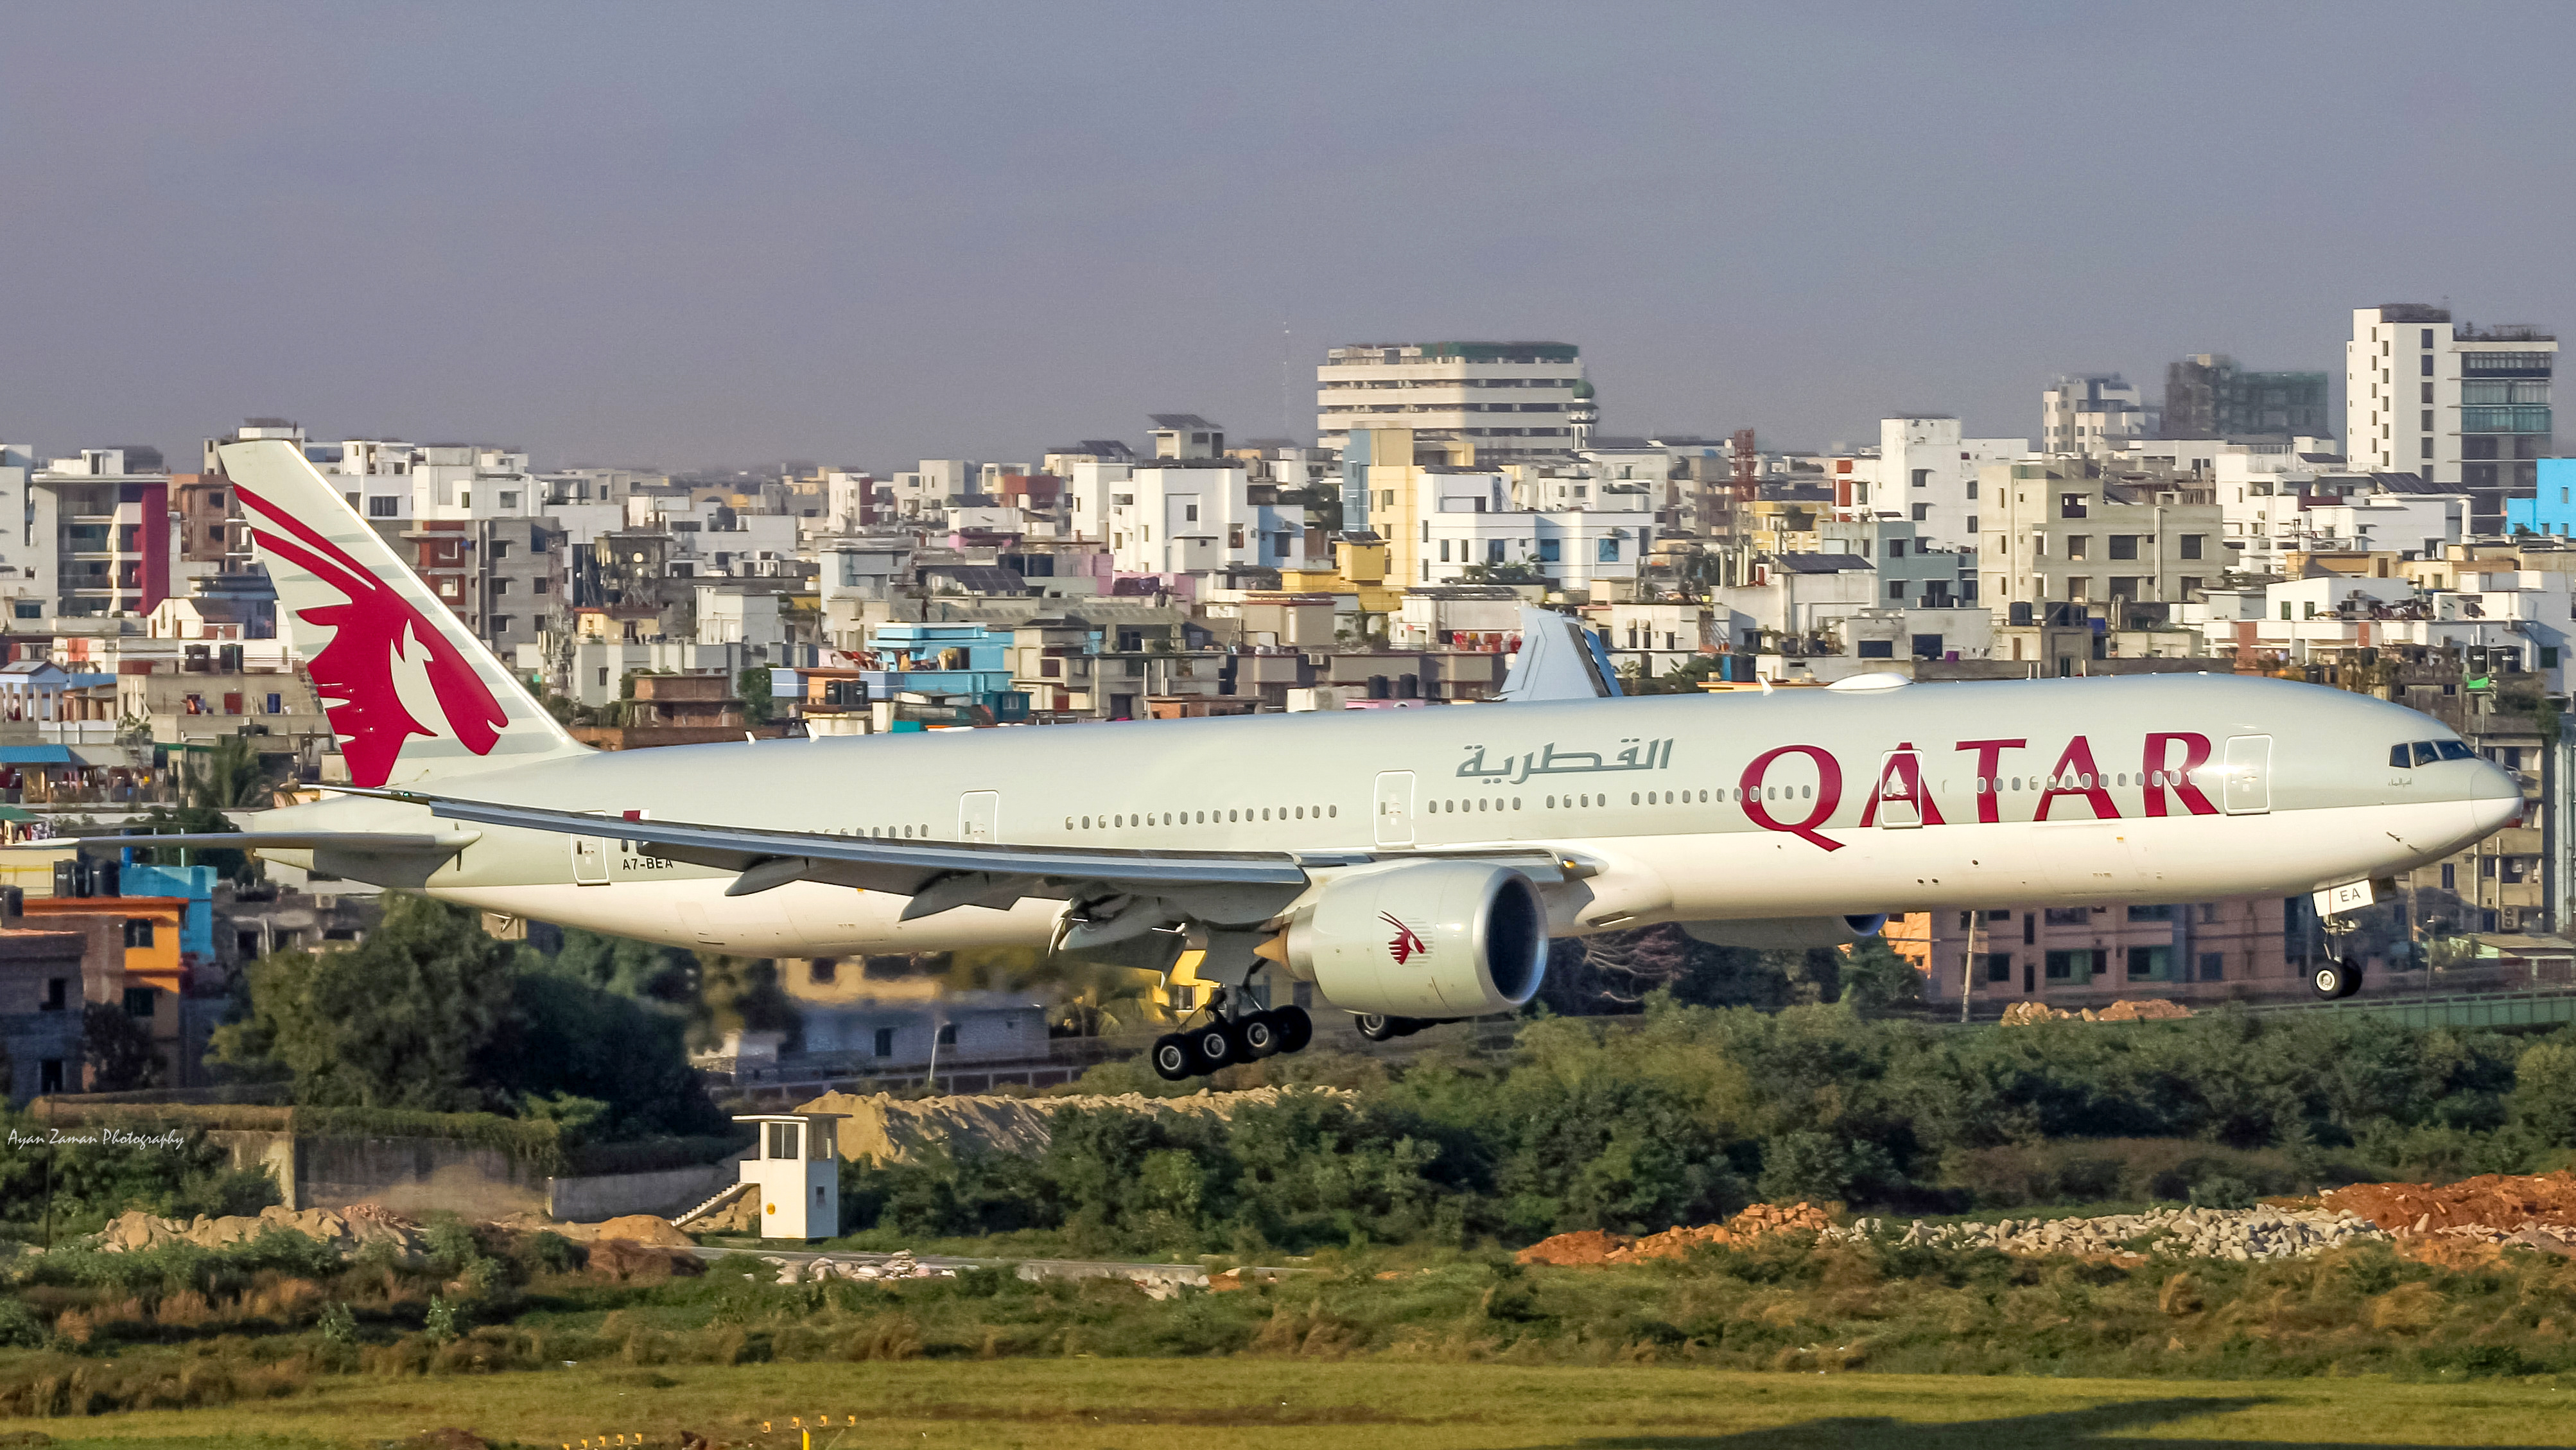 Senate inquiry finds government should review Qatar Airways decision